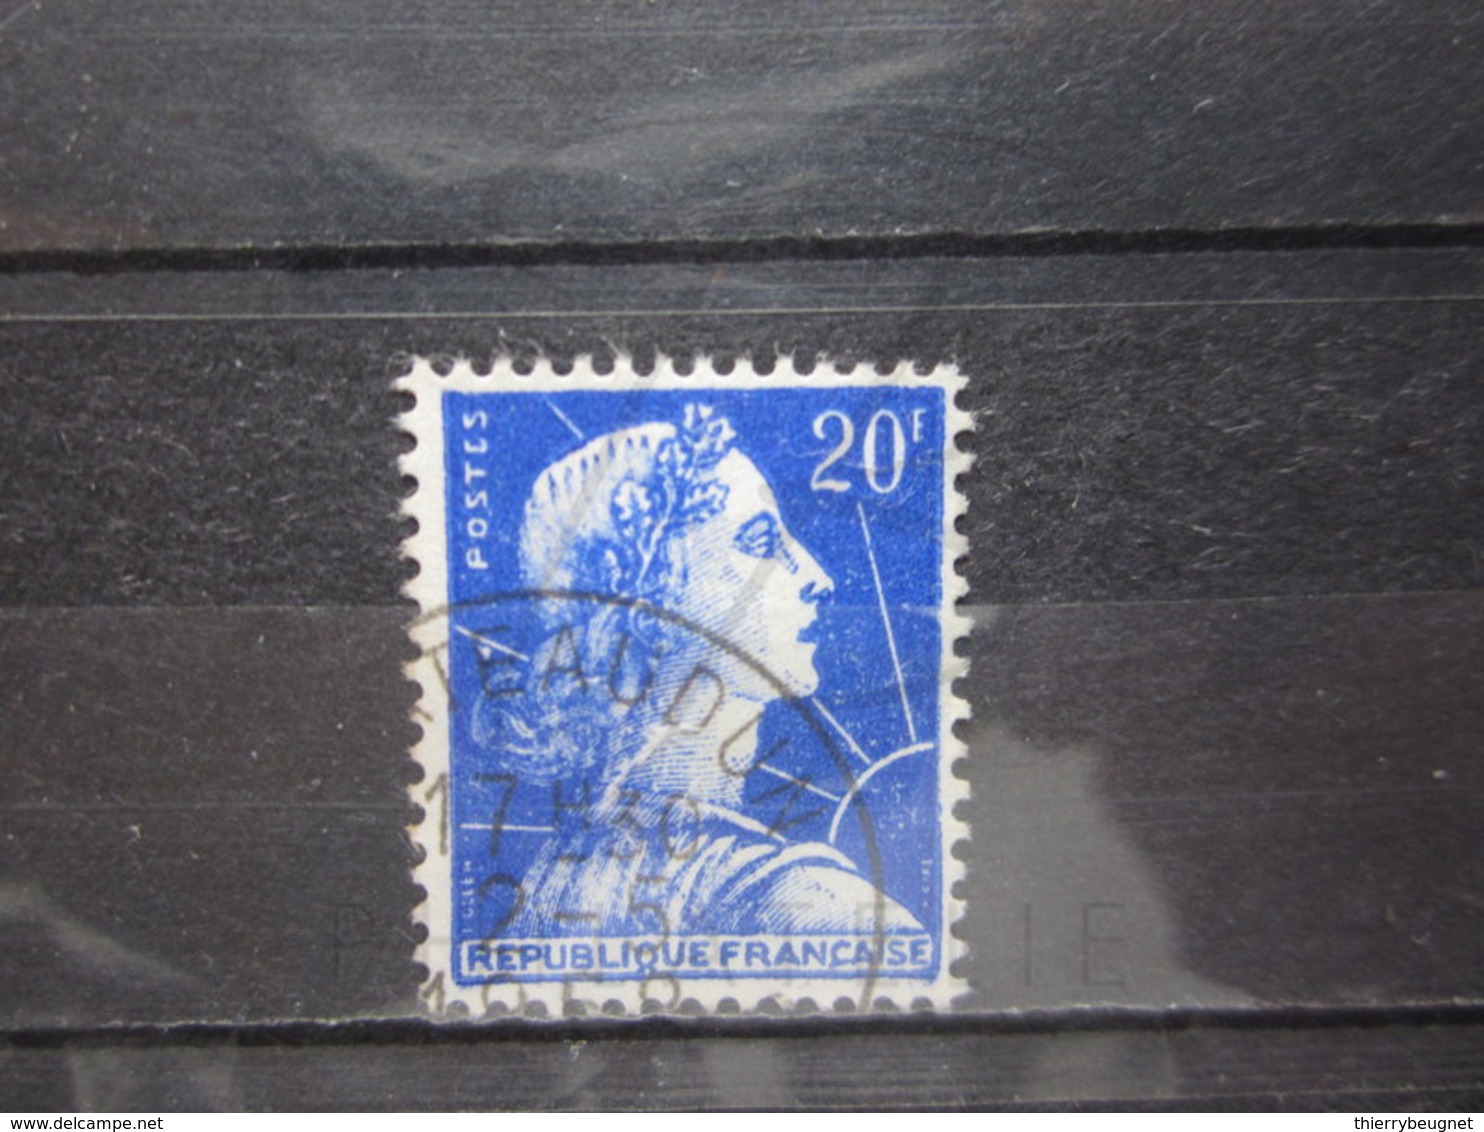 VEND BEAU TIMBRE DE FRANCE N° 1011B , SURENCRE !!! (b) - Used Stamps